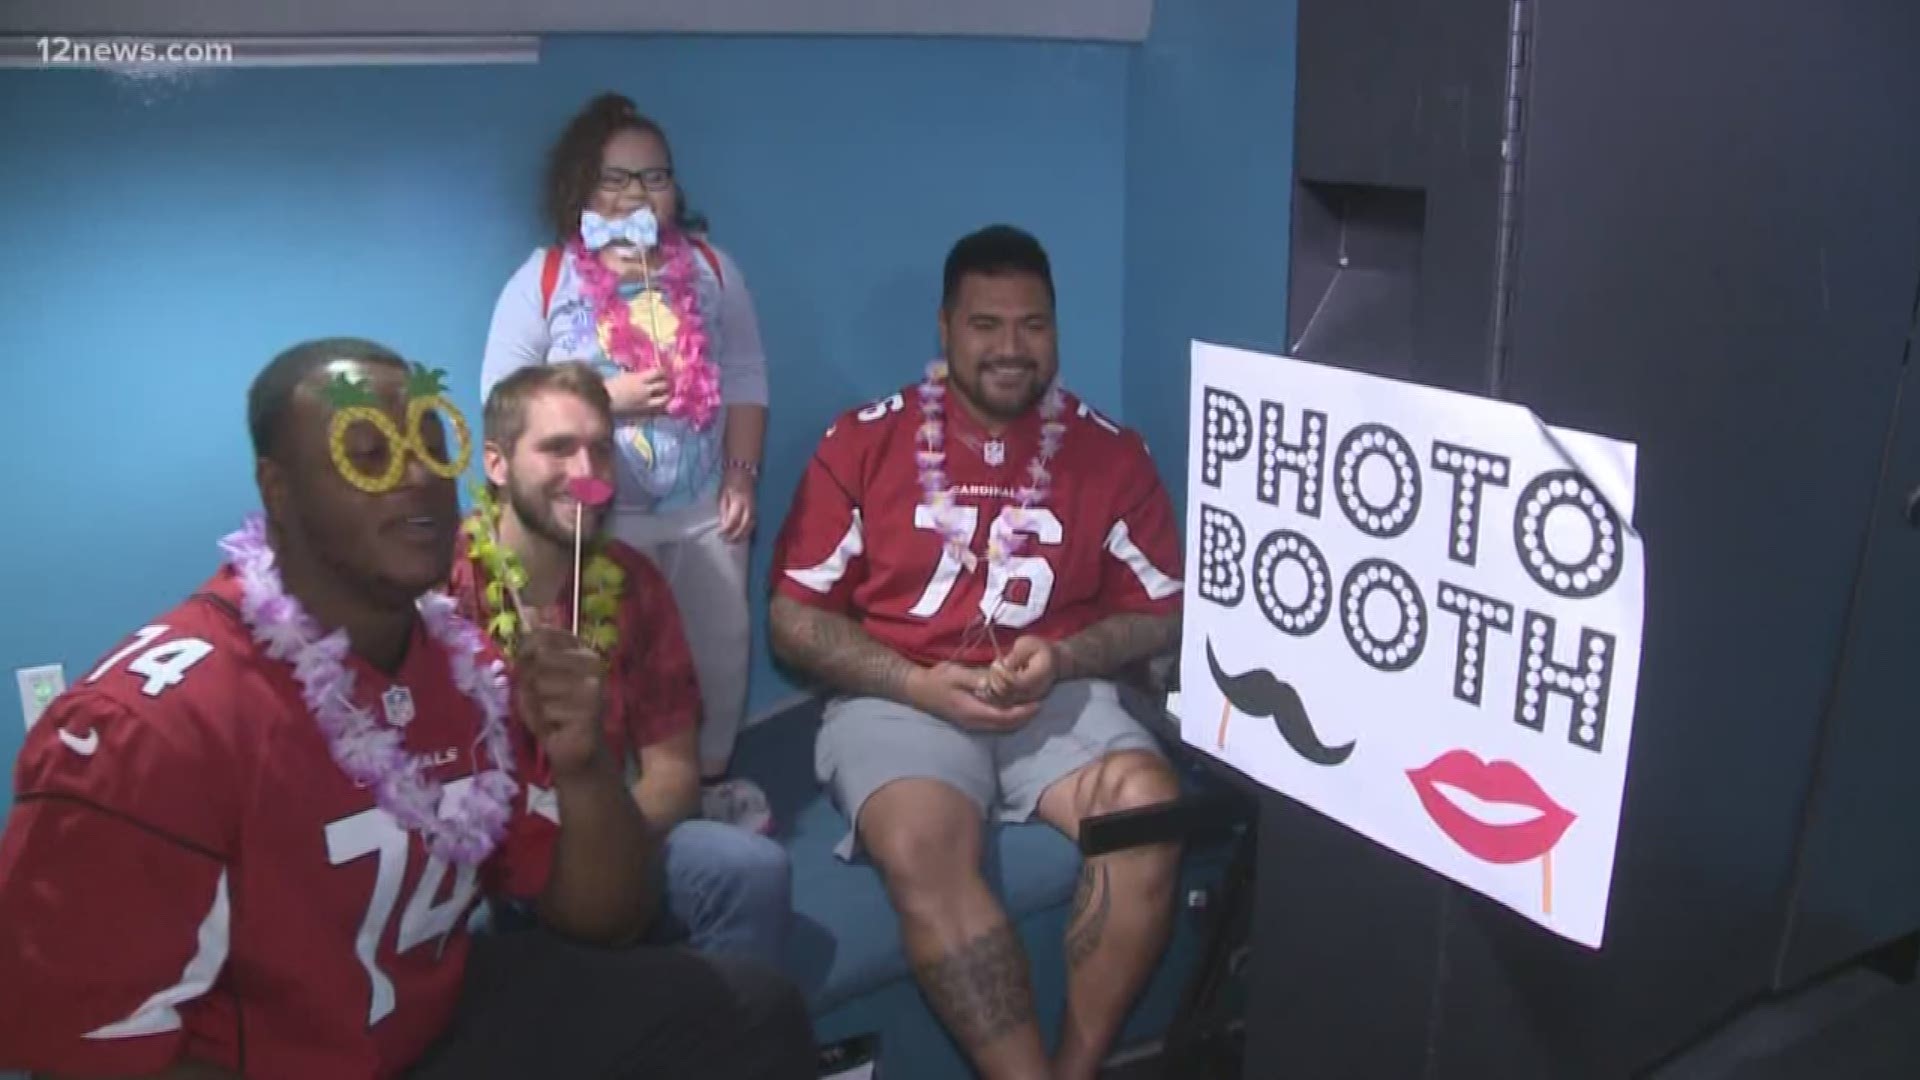 The Arizona Cardinals are giving back on Giving Tuesday. Members of the team threw a party for patients at Phoenix Children's Hospital. The team is also triple matching any donation made today to PCH.